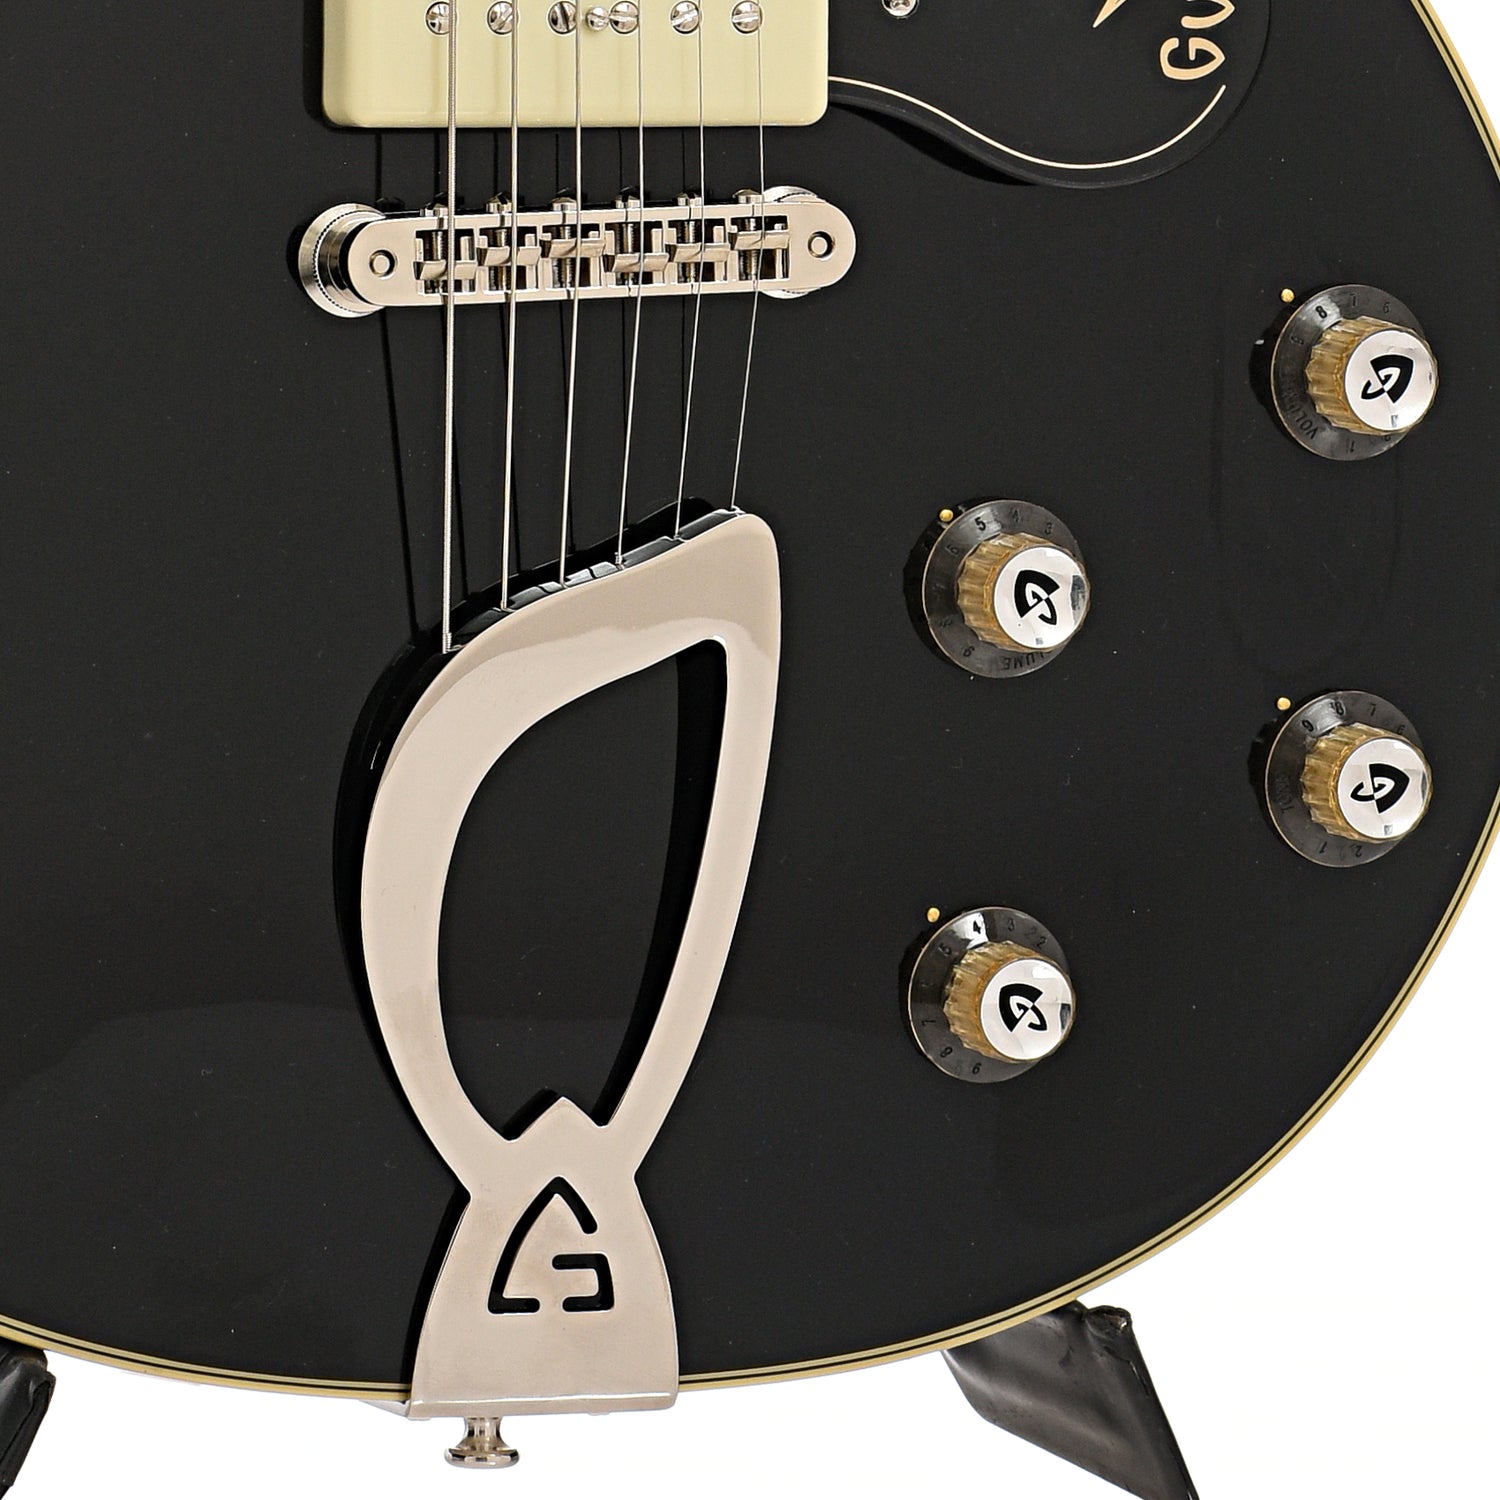 Tailpiece, bridge, and controls of Guild Newark St. Collection M-75 Aristocrat Hollow Body Archtop Guitar, Limited Edition Black Finish